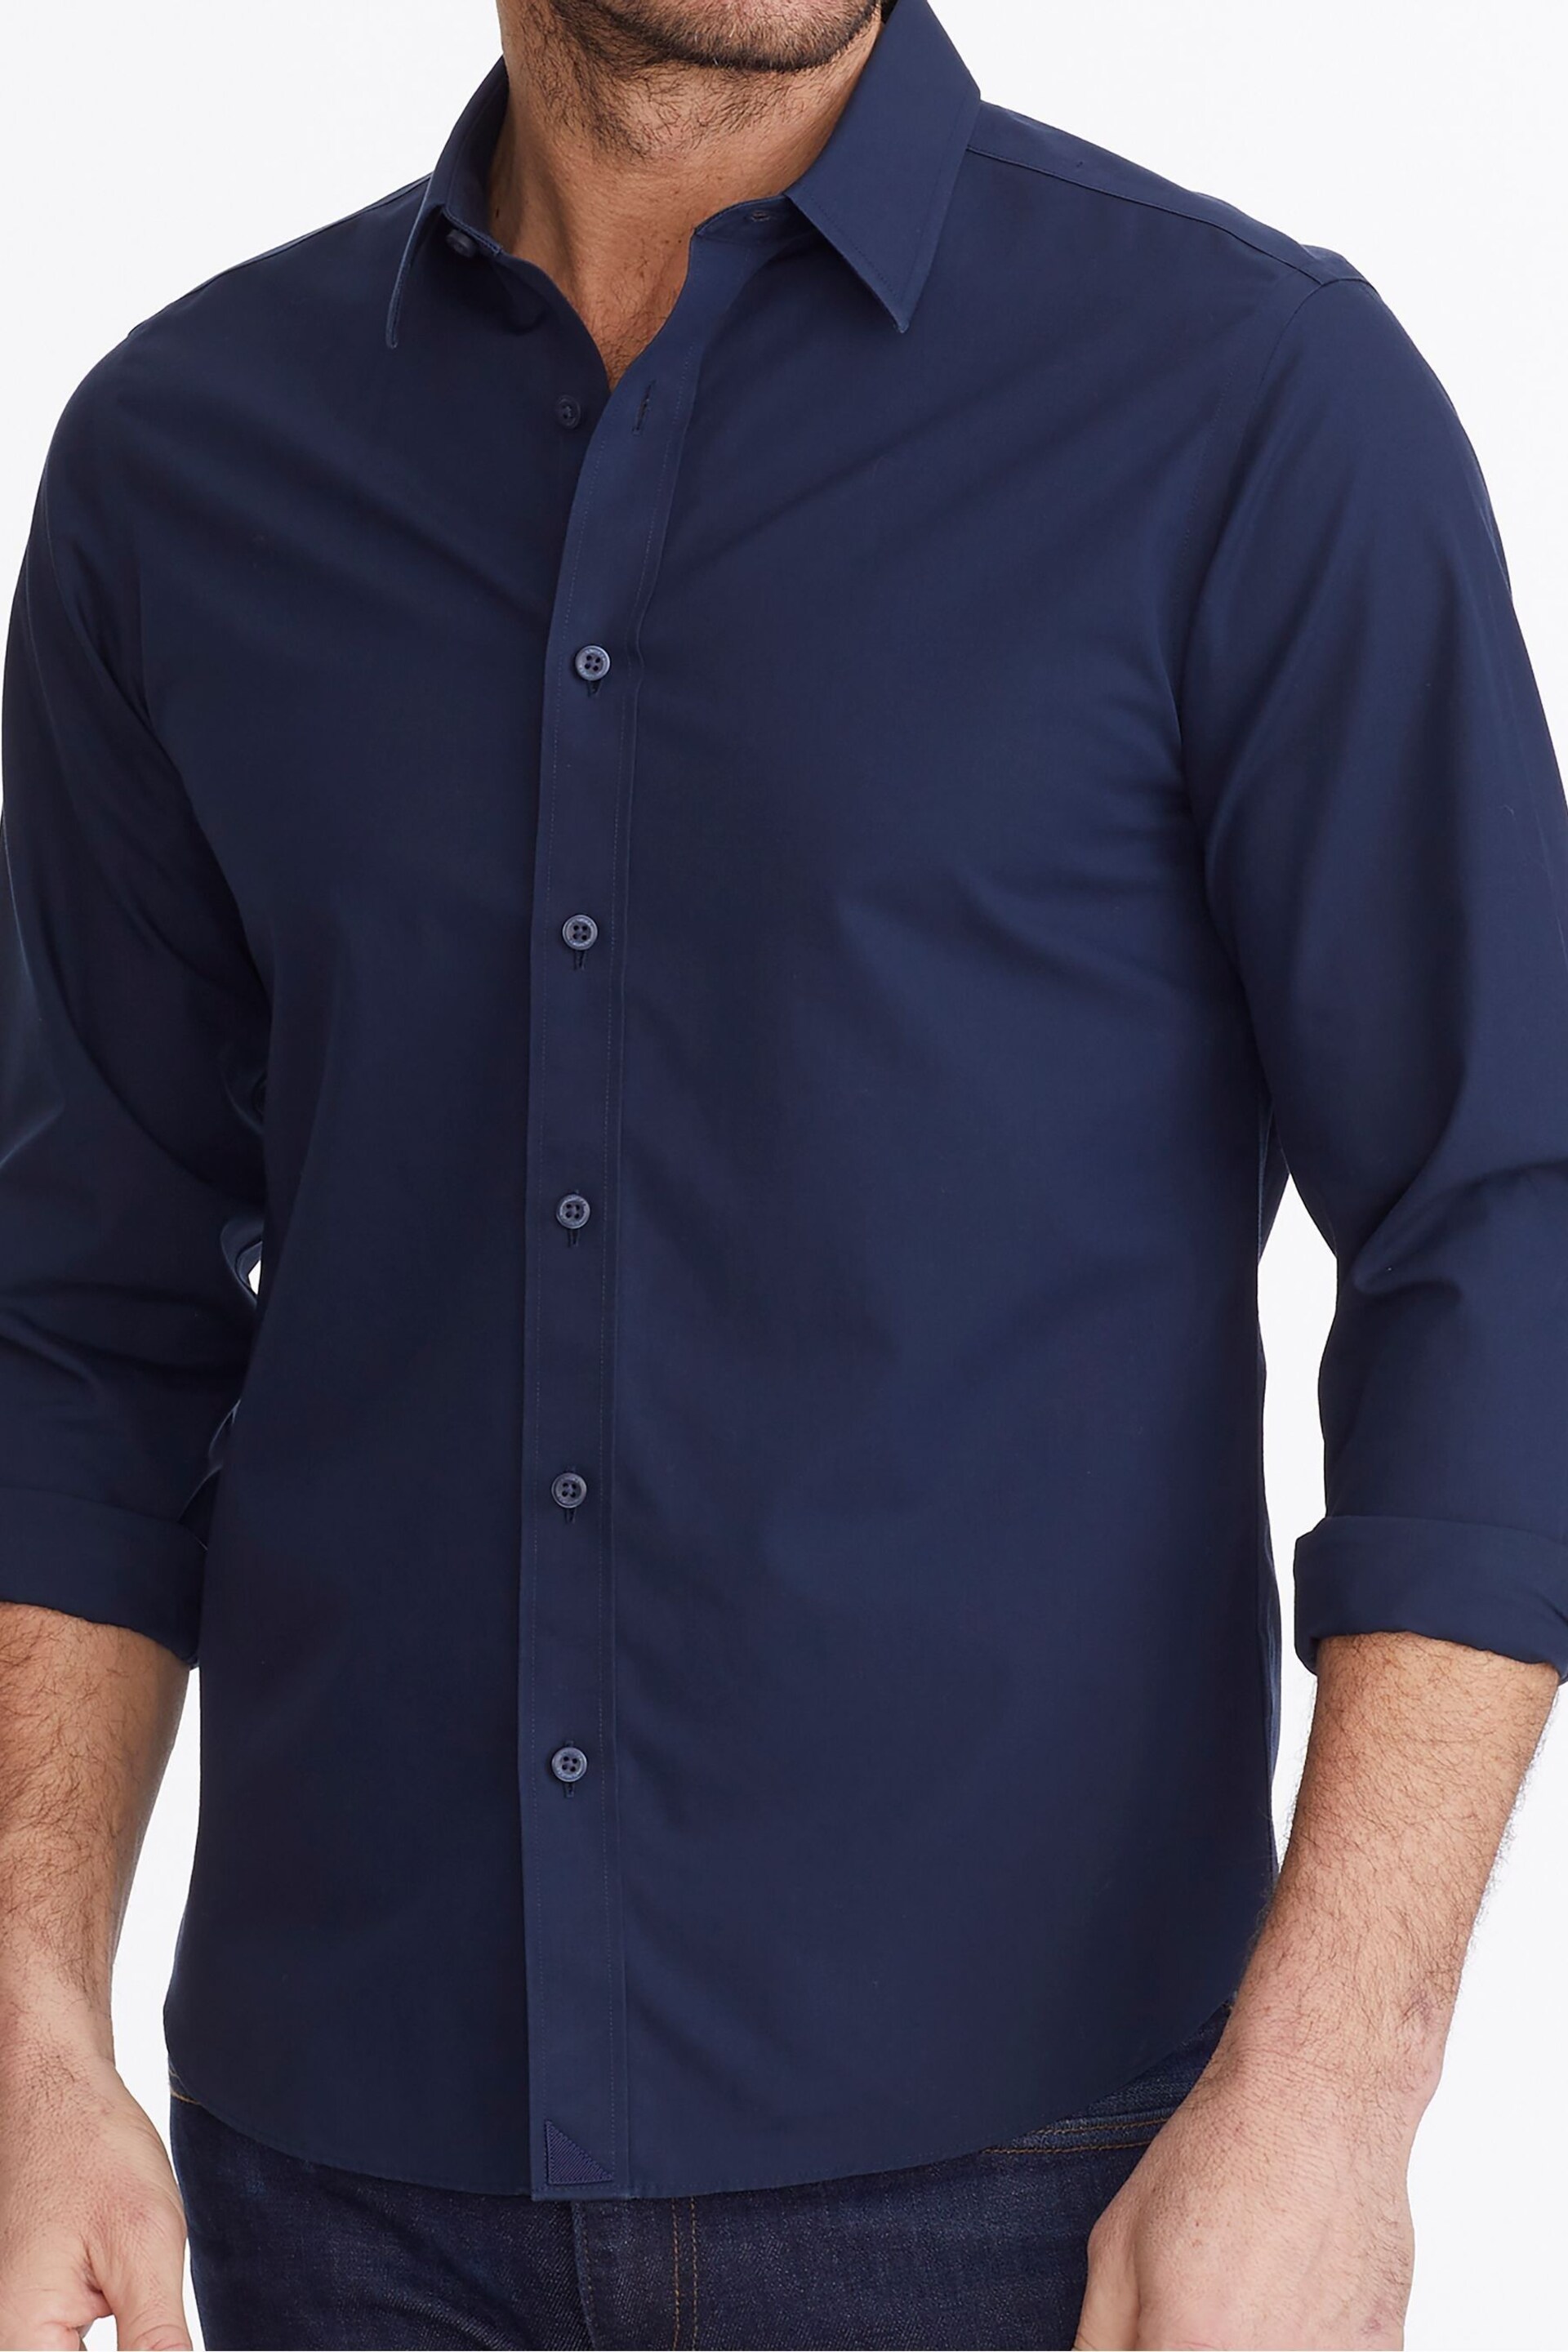 UNTUCKit Blue Wrinkle-Free Relaxed Fit Castello Shirt - Image 4 of 6